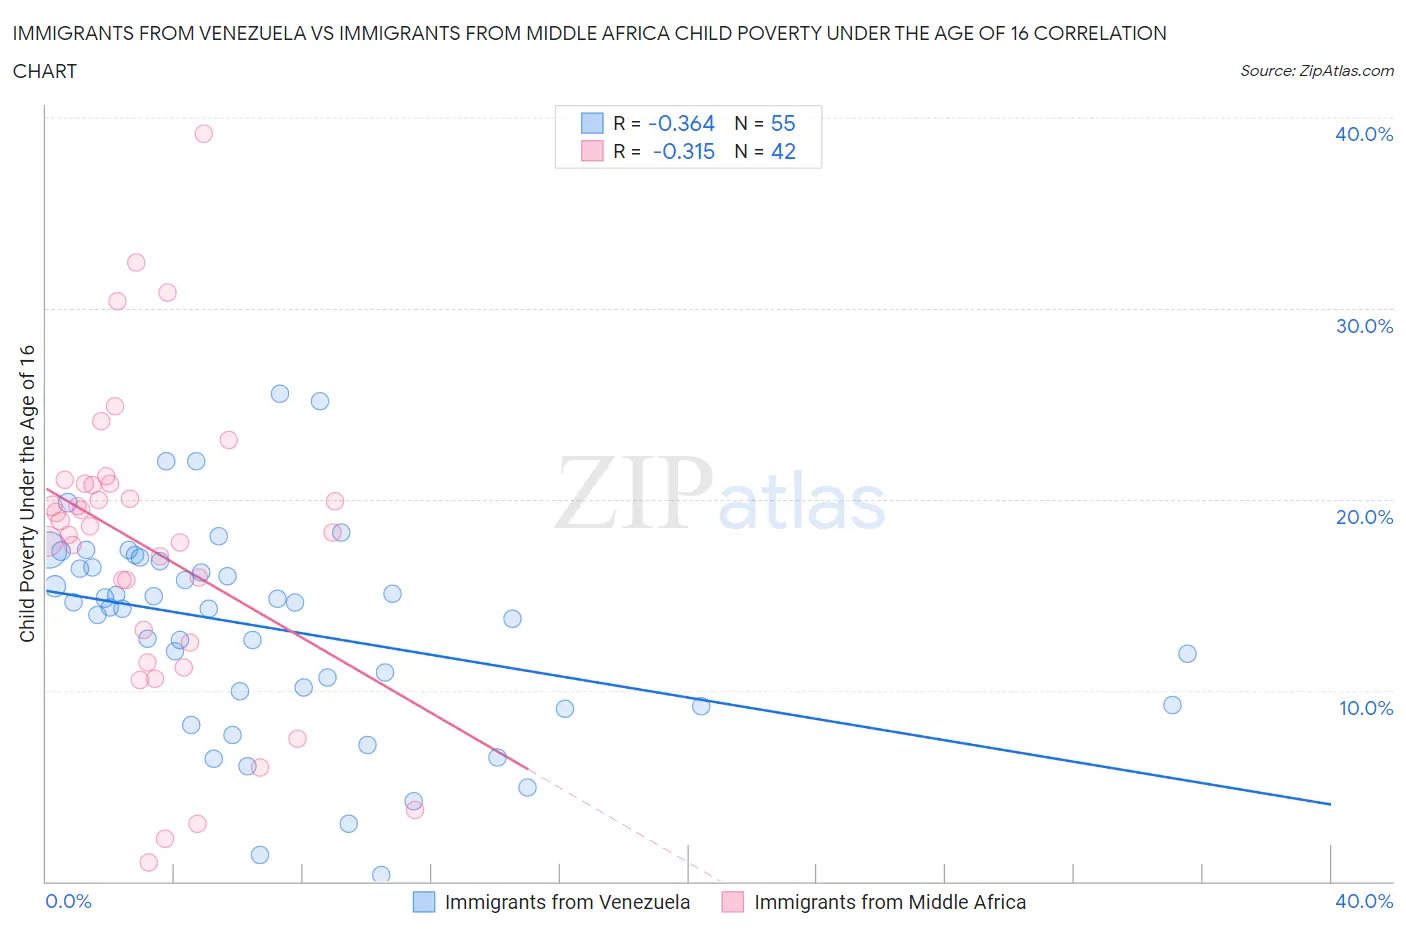 Immigrants from Venezuela vs Immigrants from Middle Africa Child Poverty Under the Age of 16